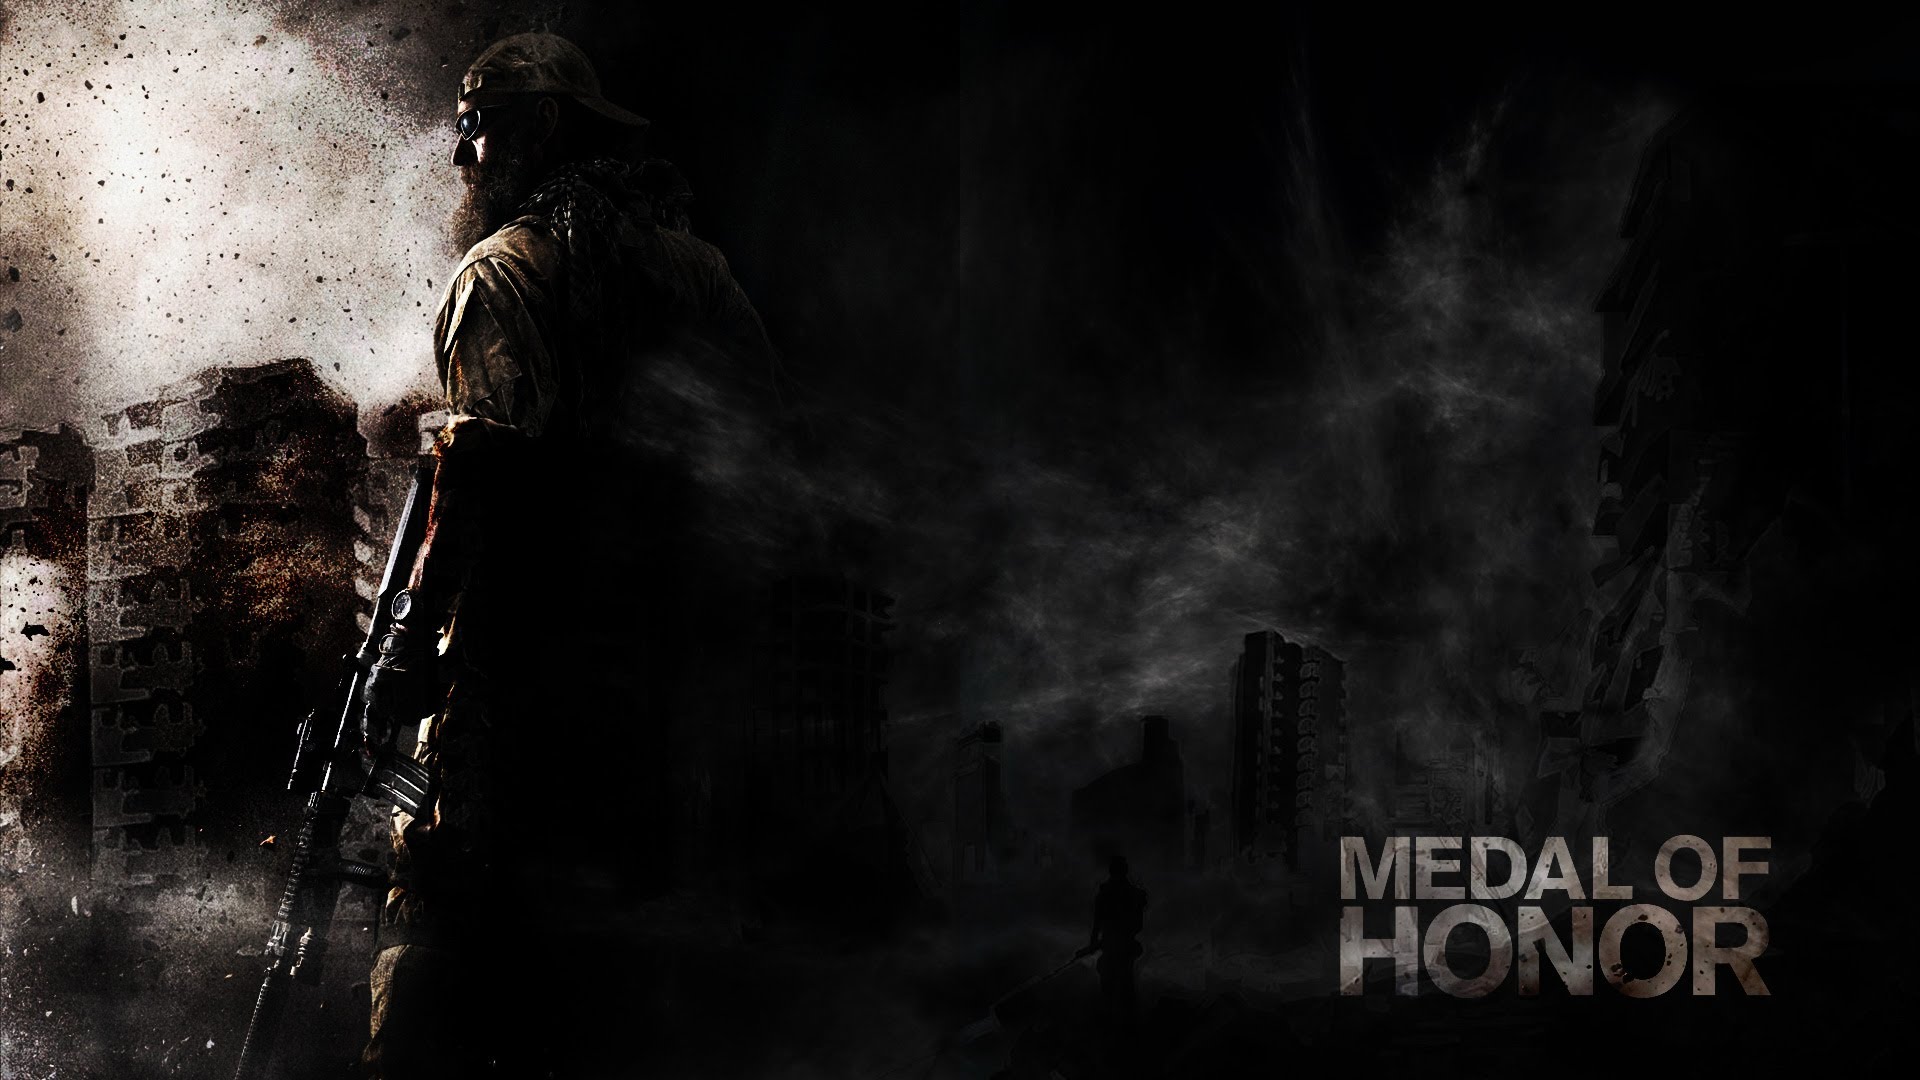 Medal of honor 10. Medal of Honor 2010 обои. Medal of Honor 4. Medal of Honor (игра, 2010). Medal of Honor: Warfighter.